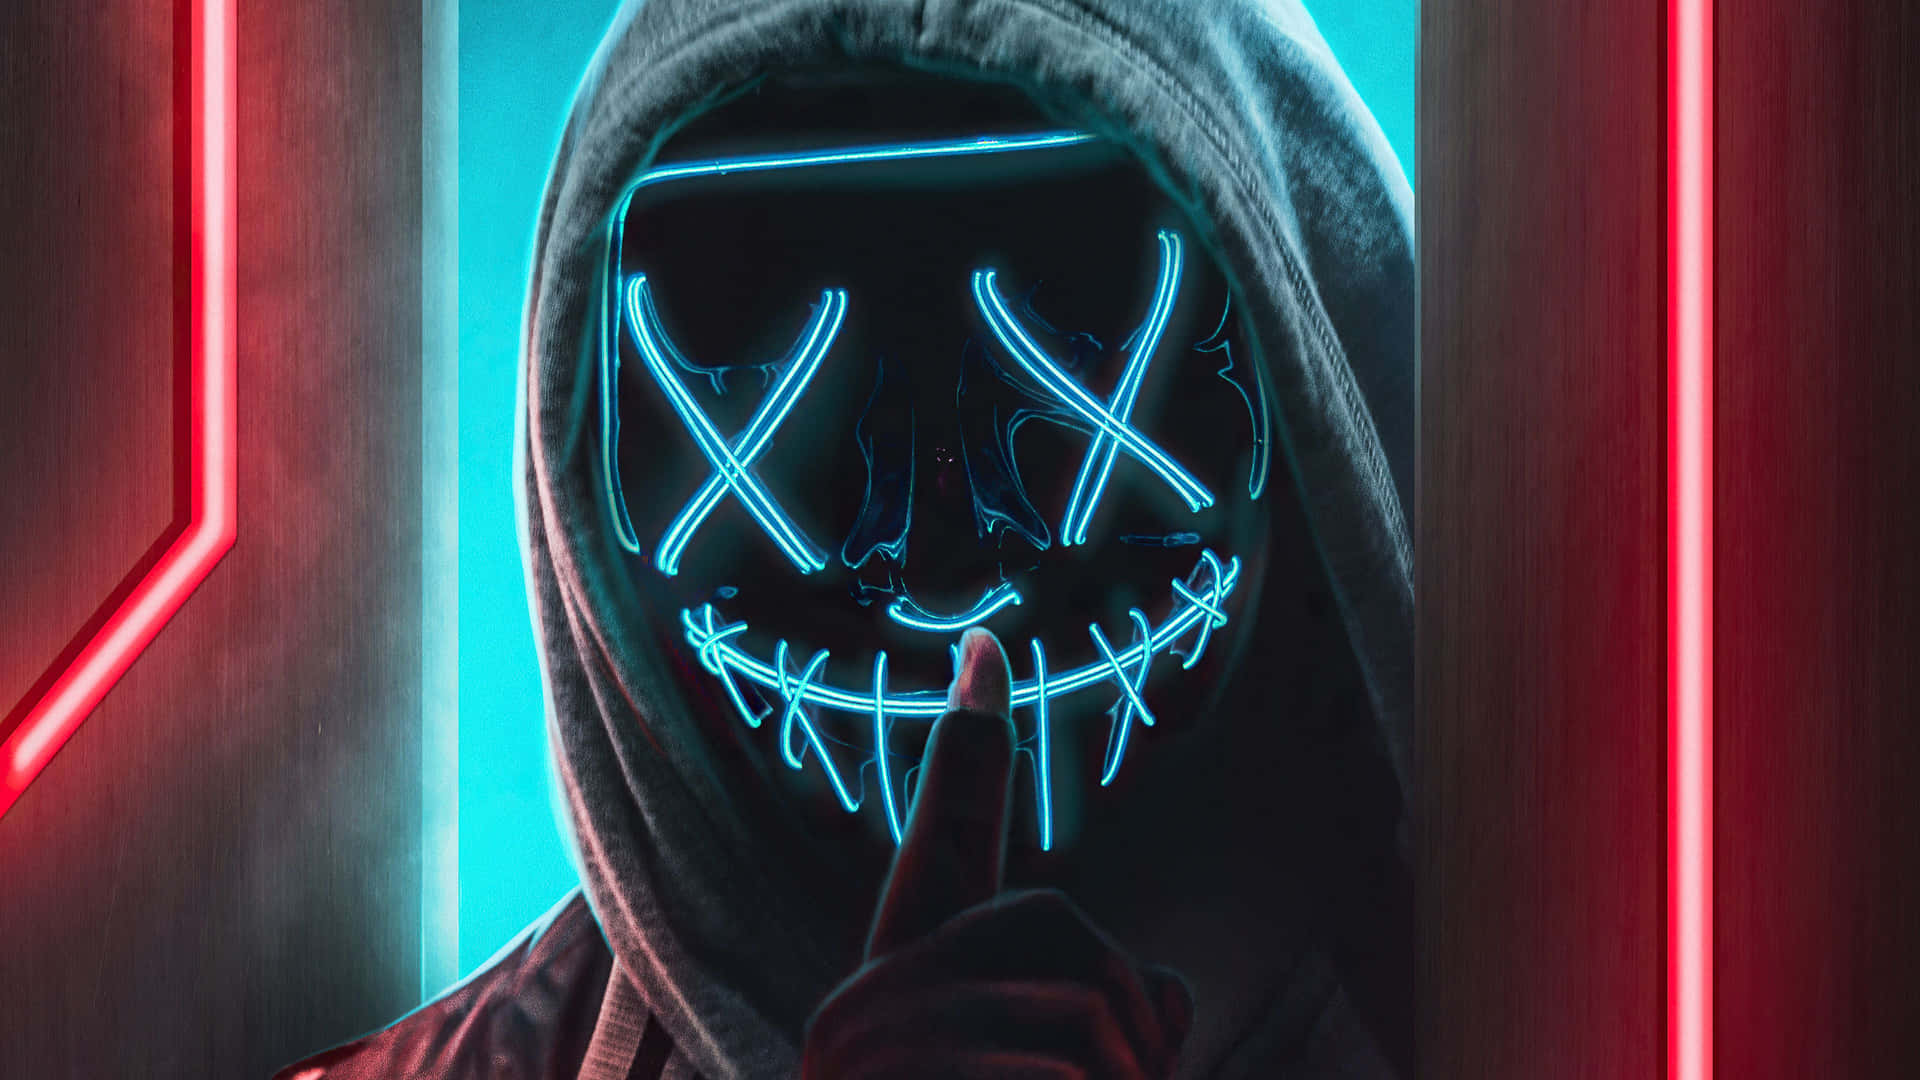 A Man In A Hoodie With Neon Lights On His Face